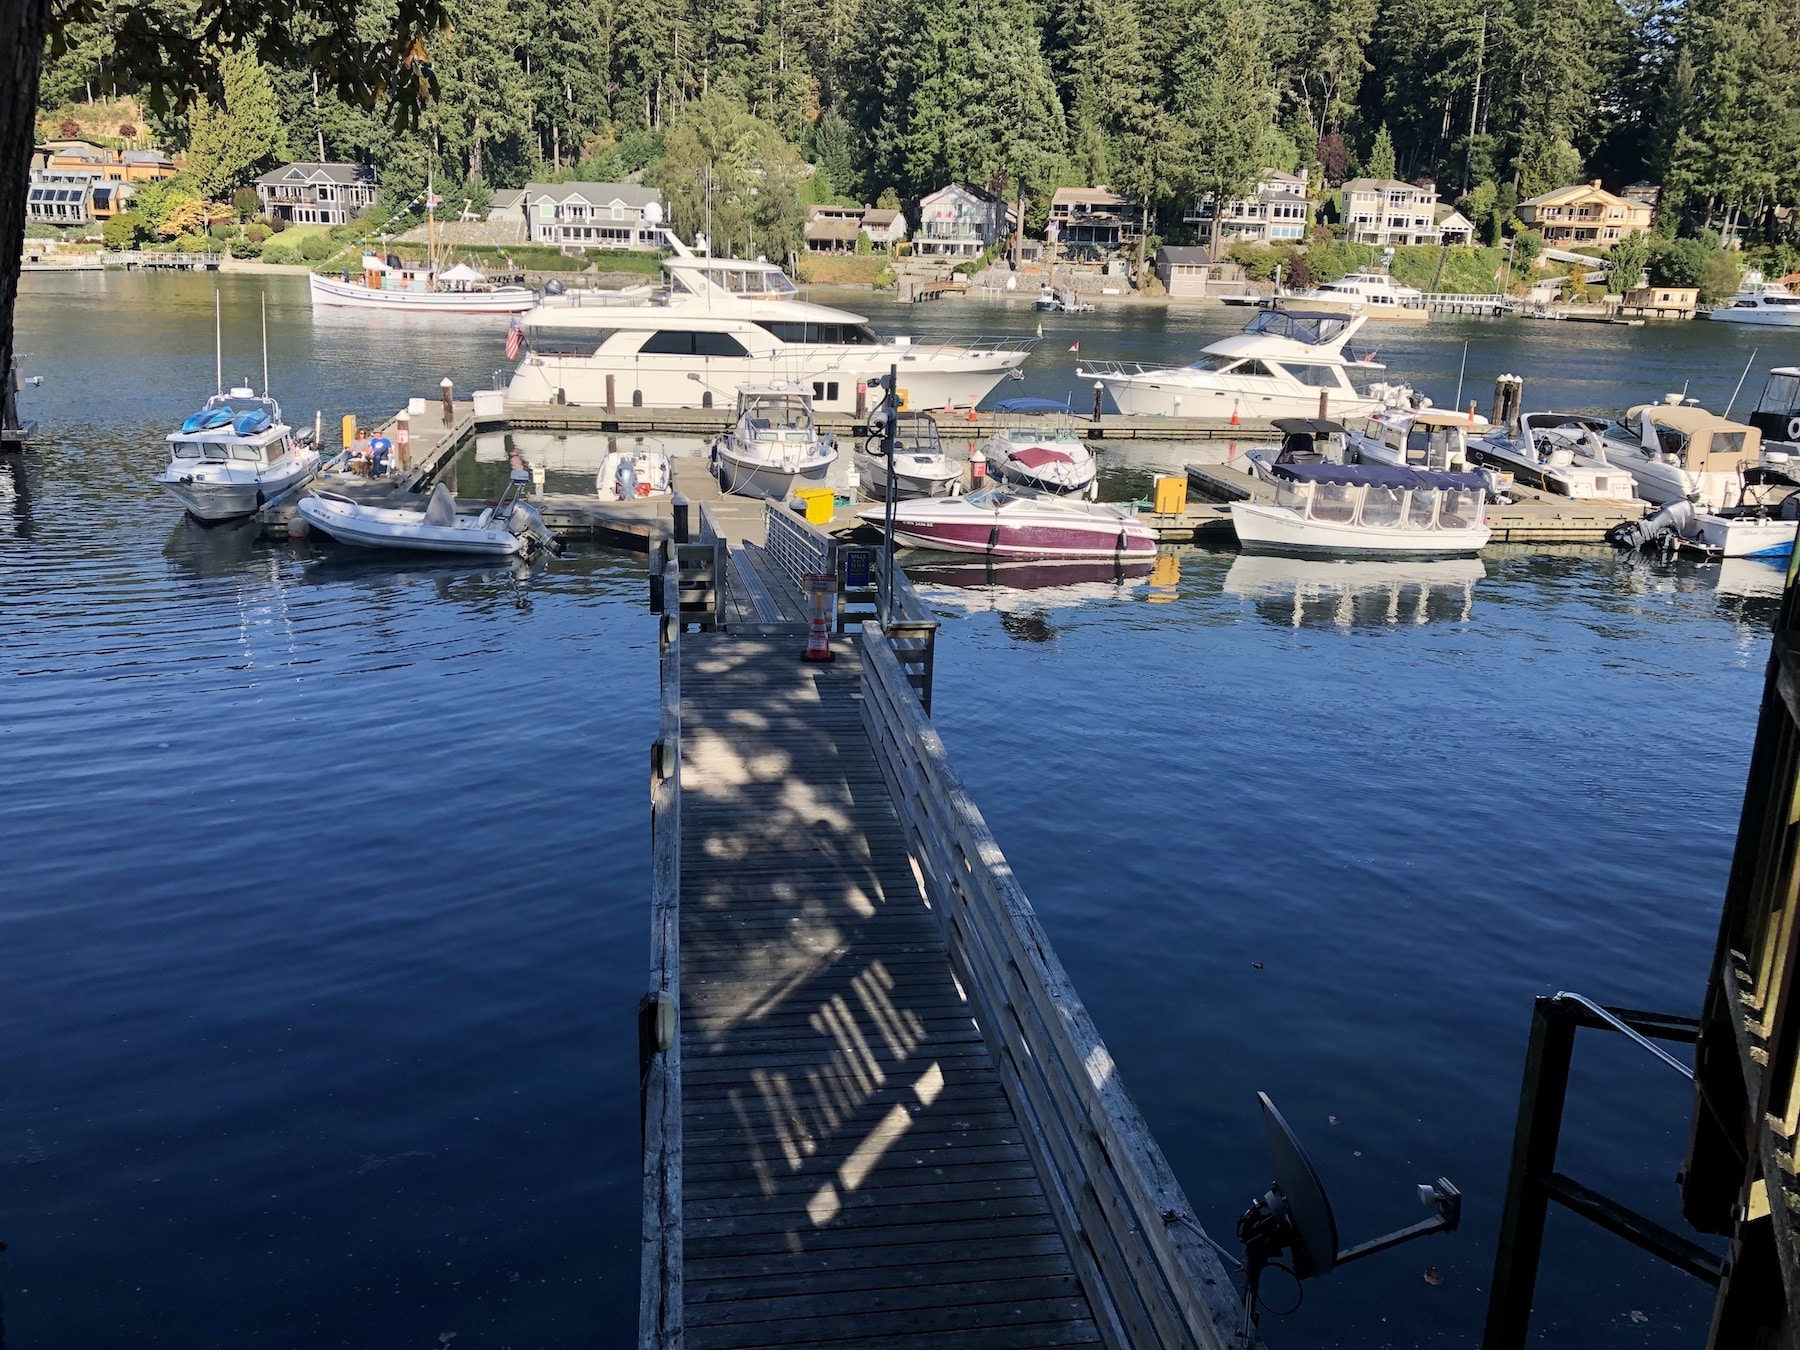 The existing dock isn't available to 7 Seas customers, but a new one will be.